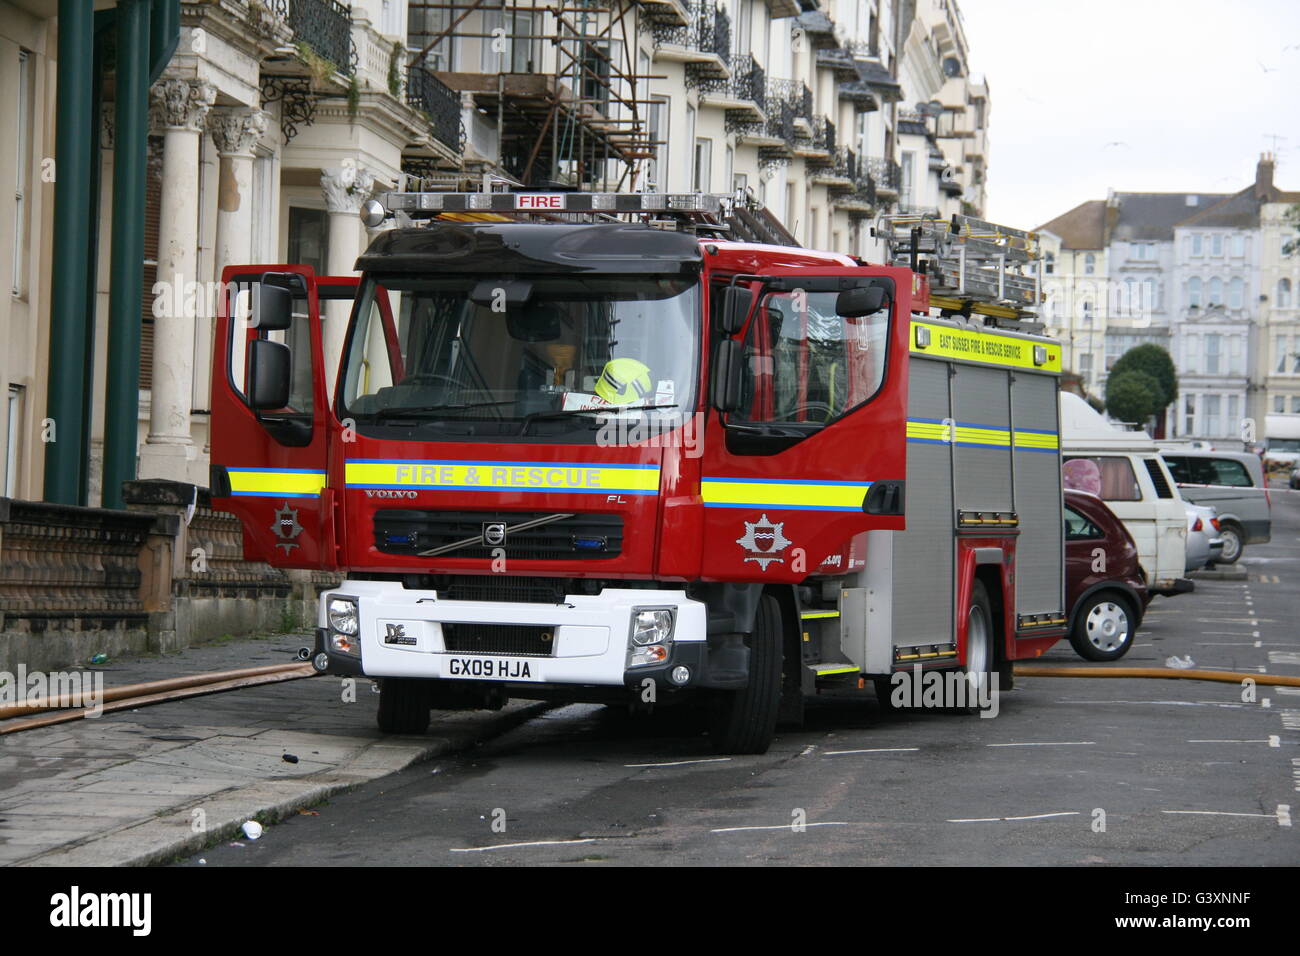 AN EAST SUSSEX FIRE & RESCUE VOLVO PUMP ATTENDING AN EMERGENCY INCIDENT WITH HOSES ON THE GROUND AROUND THE VEHICLE Stock Photo